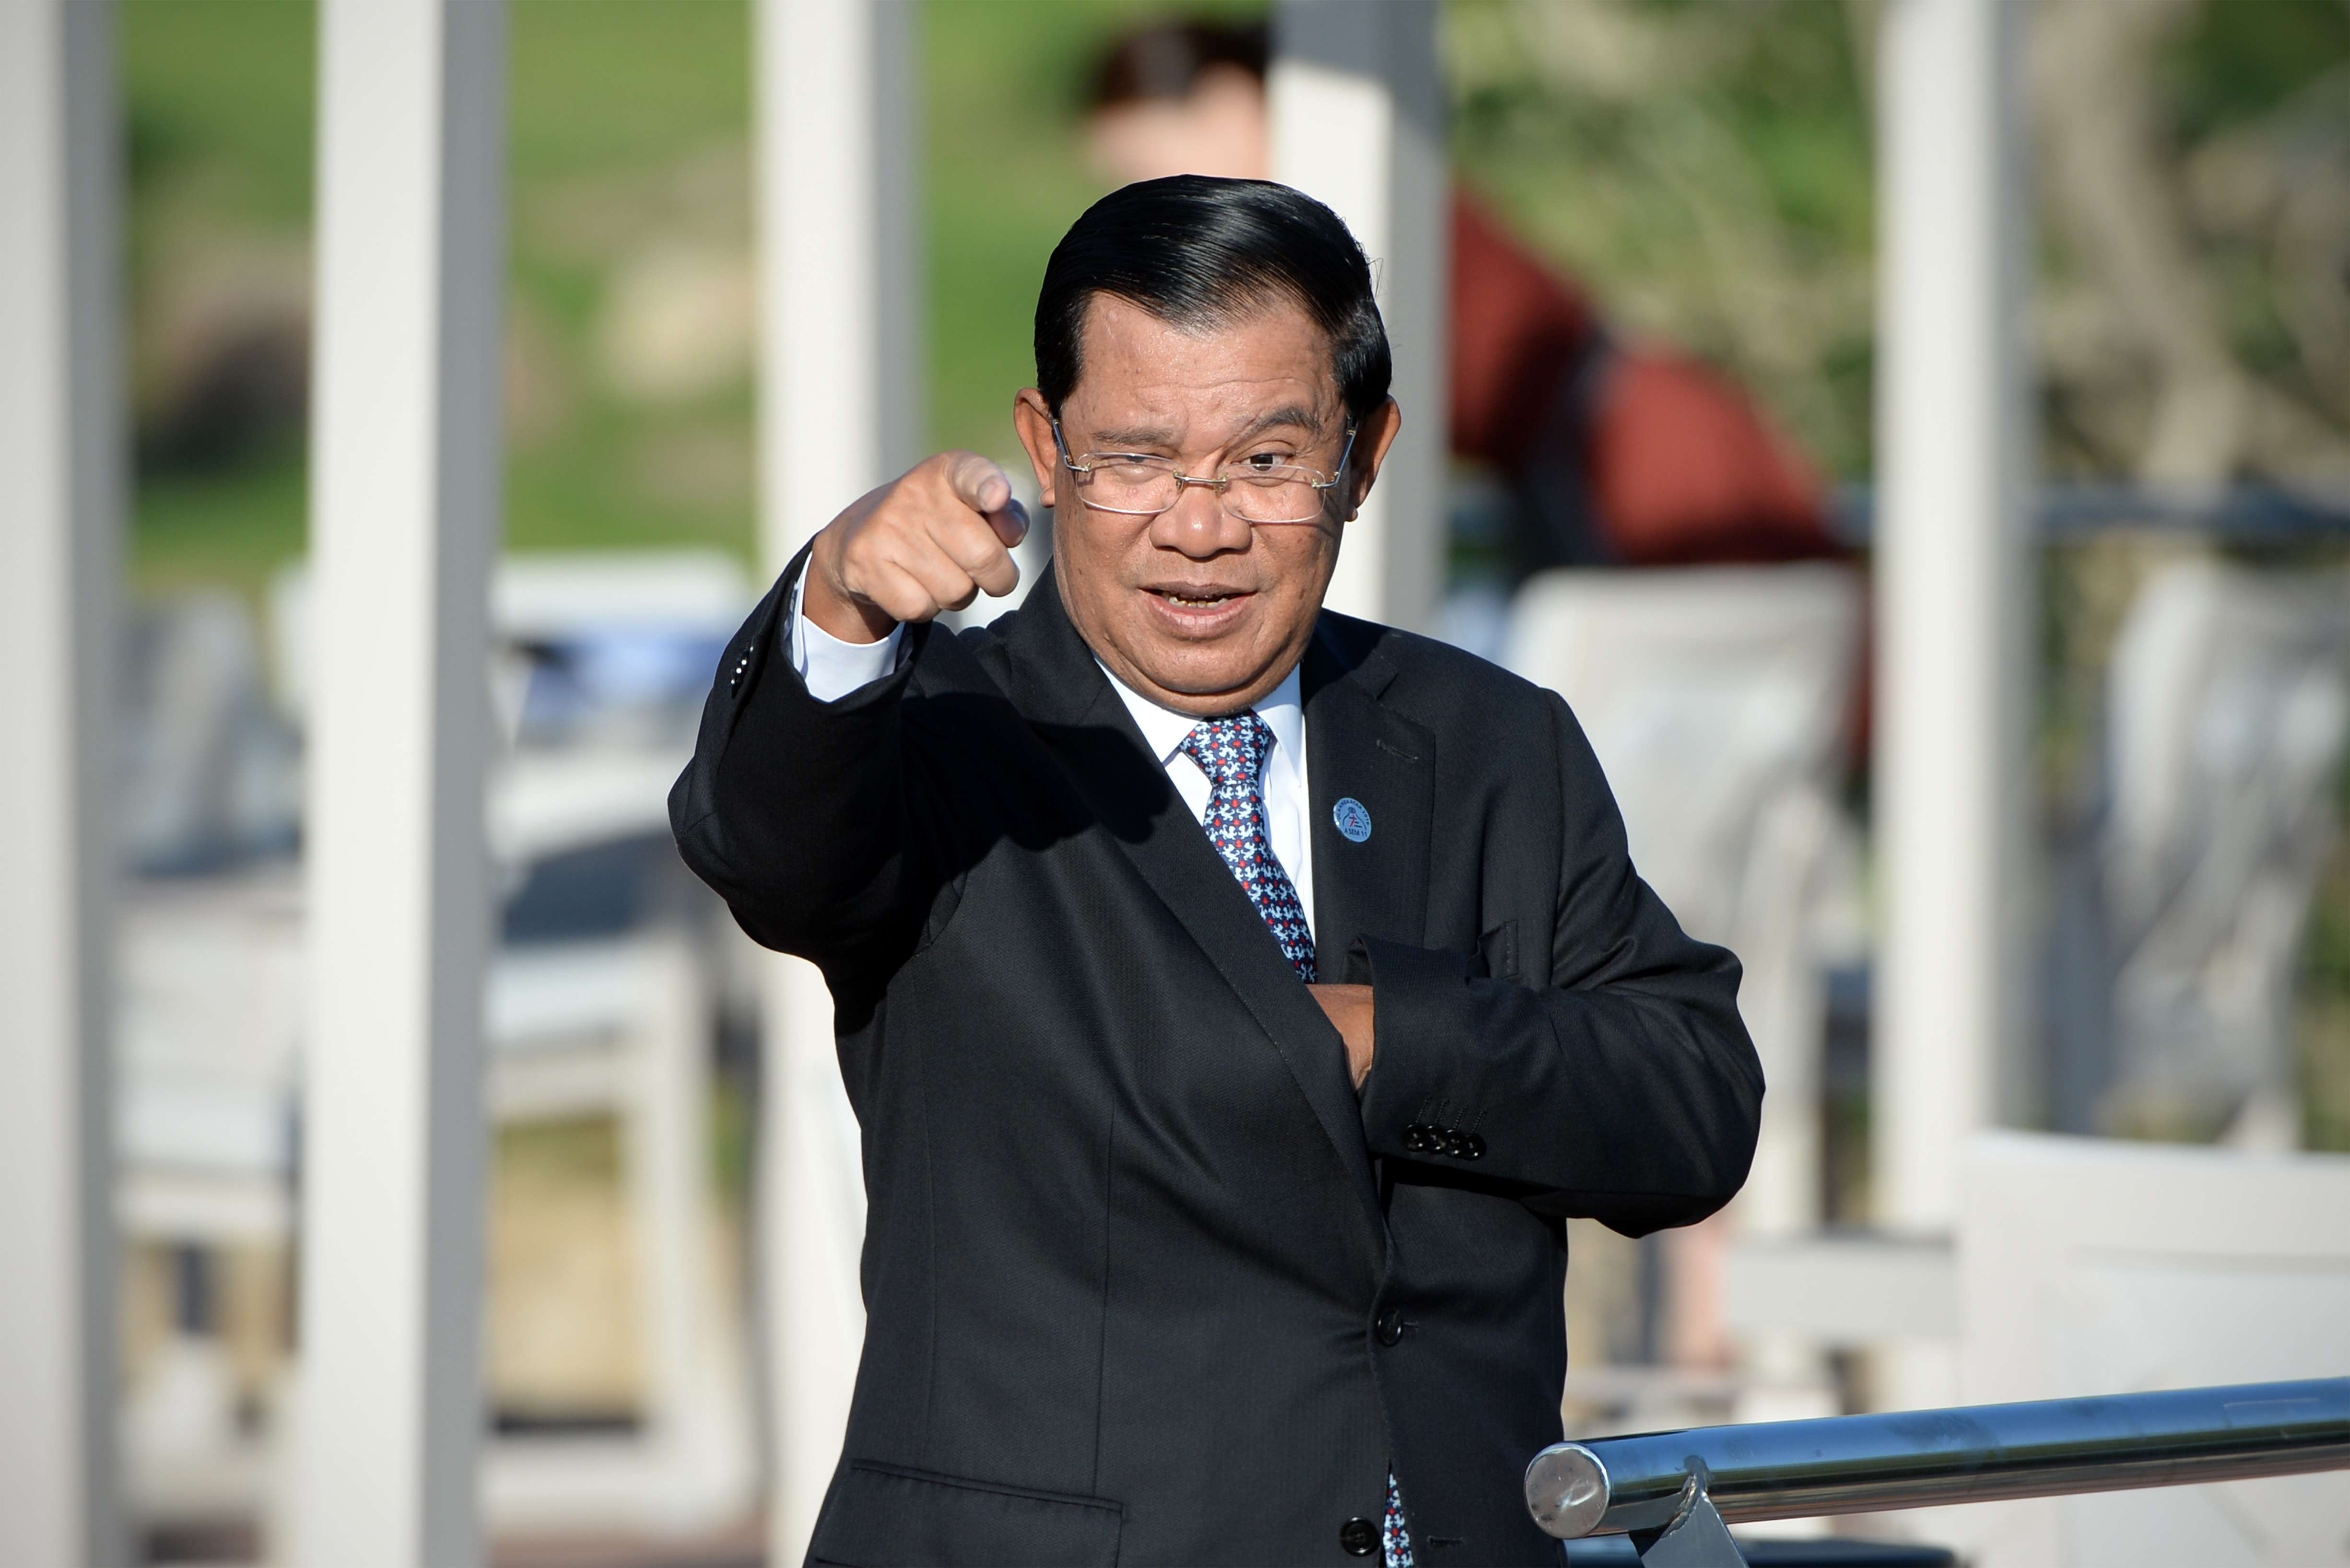 Cambodia's Prime Minister Hun Sen has split Asean with his backing of China’s claims in the South China Sea. Photo: AFP